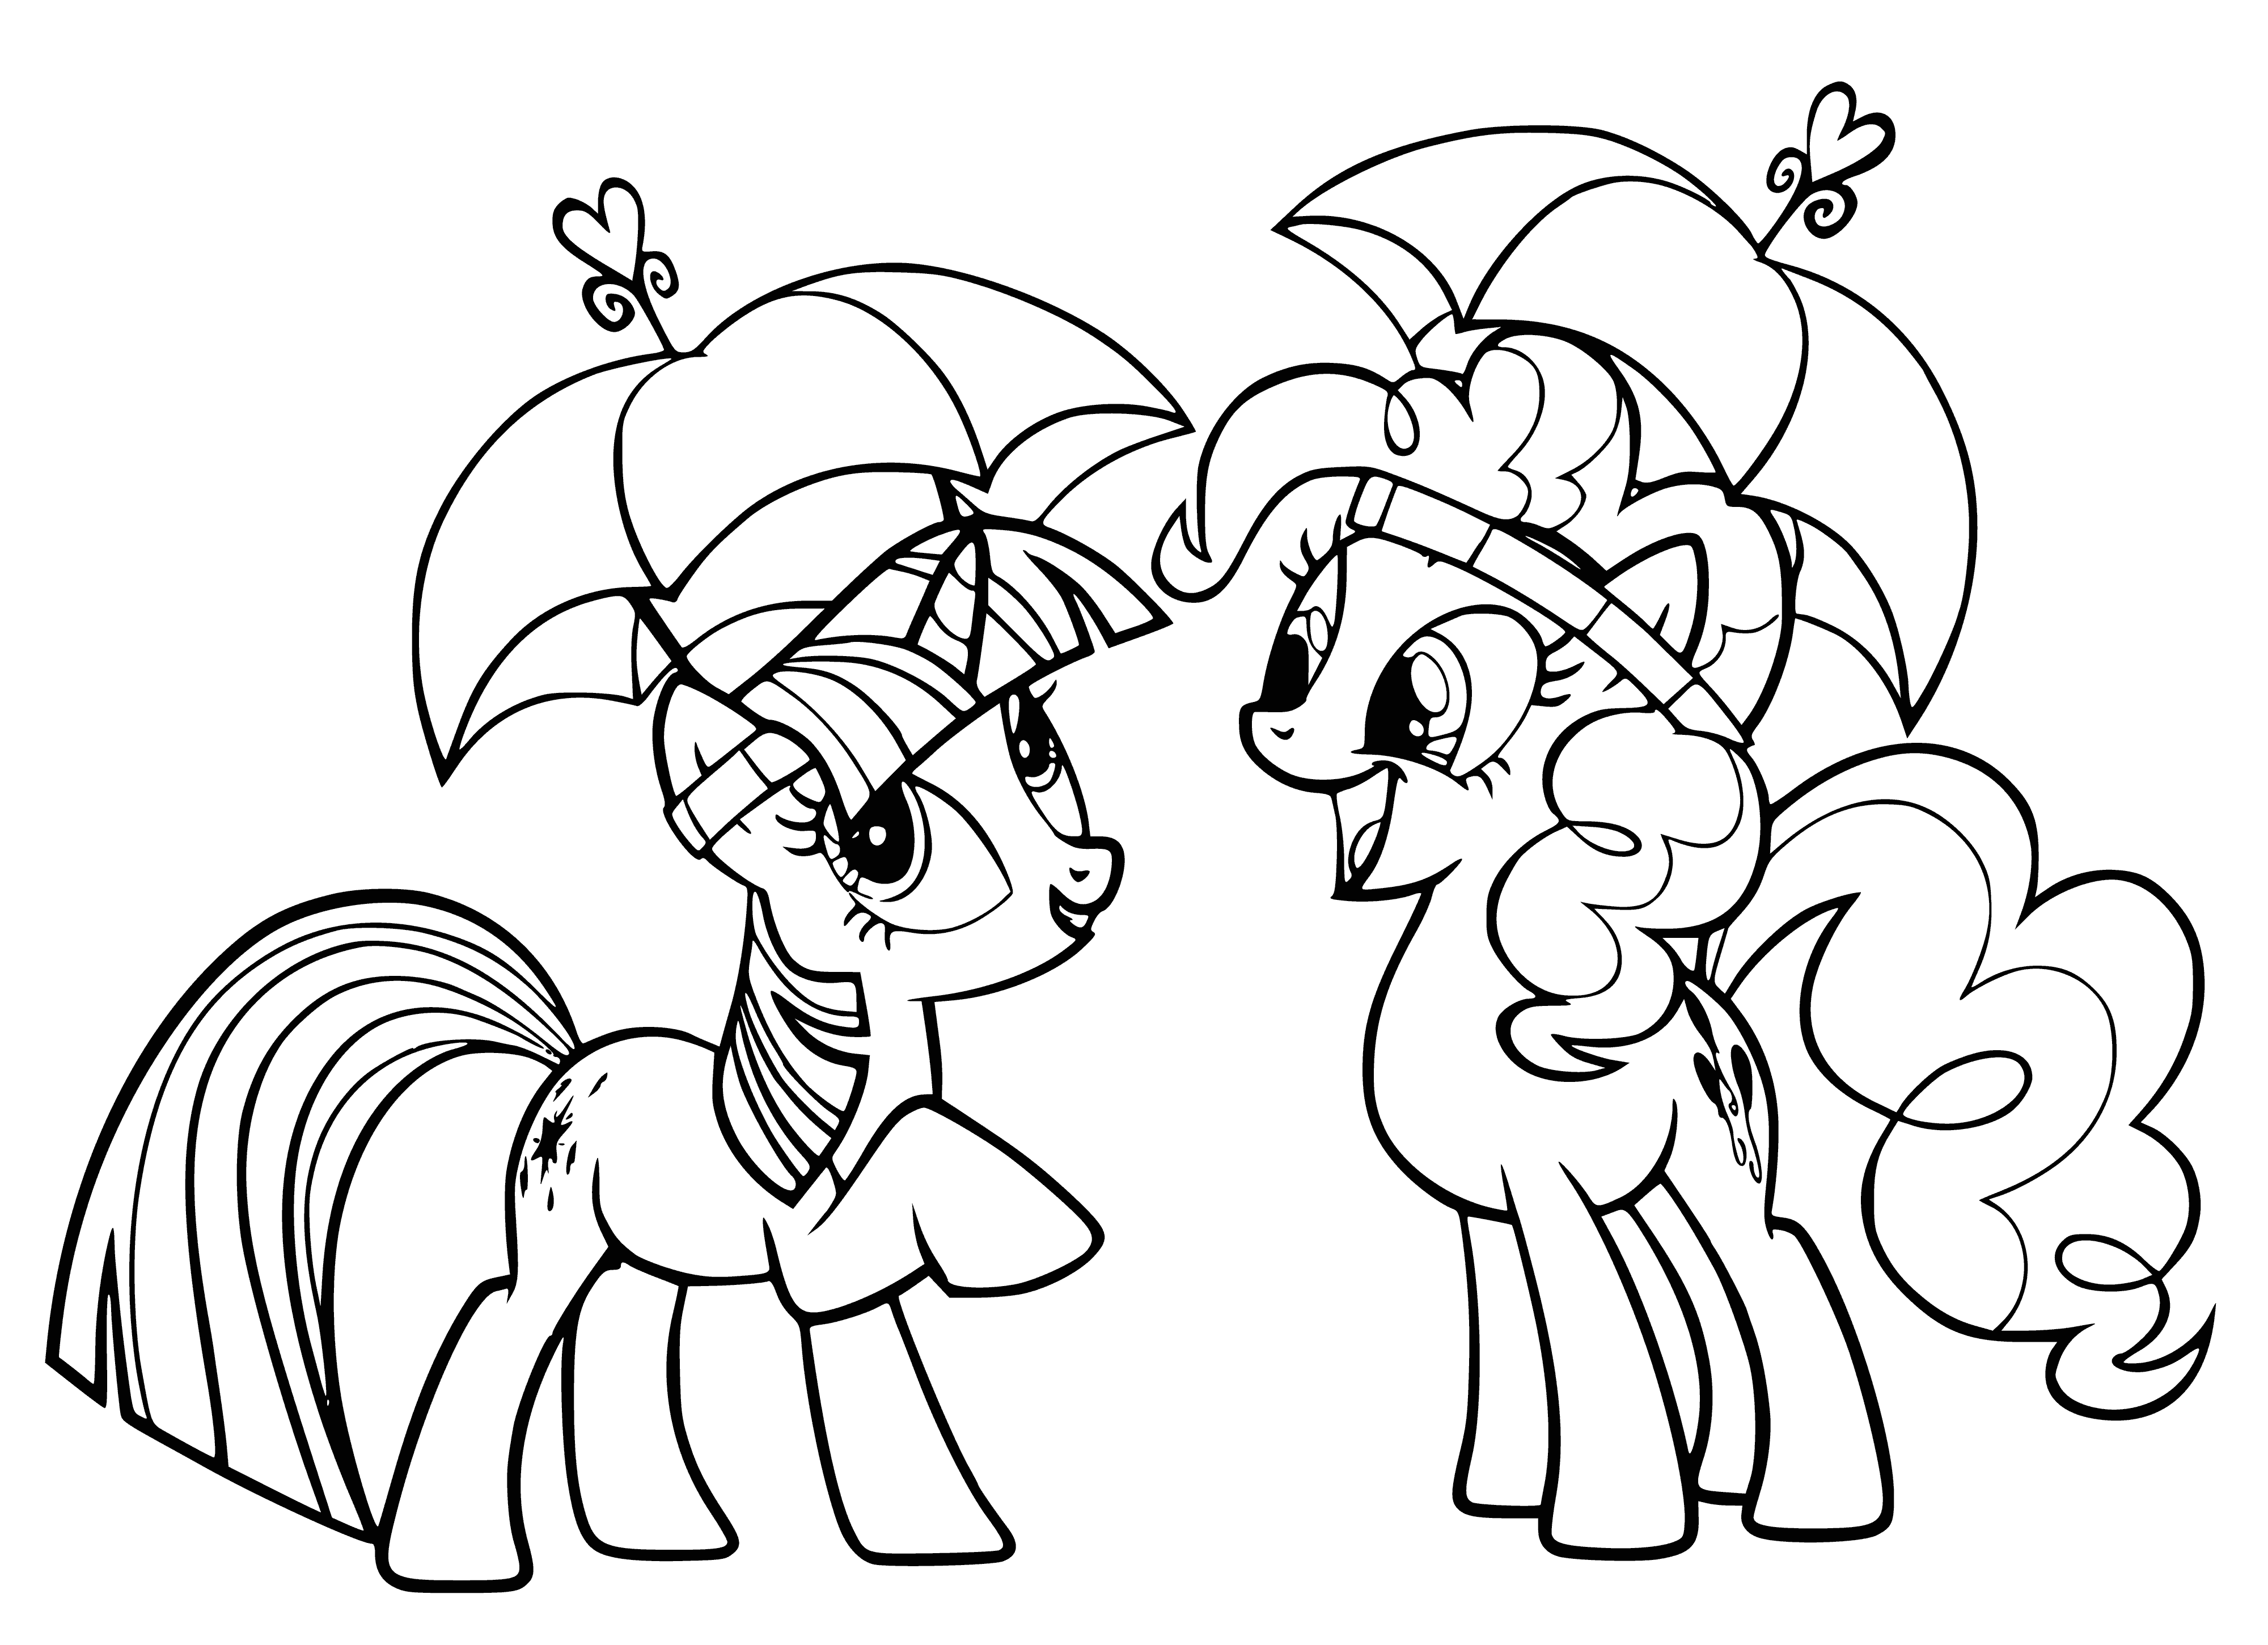 coloring page: Twilight Sparkle is a purple unicorn w/ pink mane & saddle next to a blue-maned pink pony. #MyLittlePony